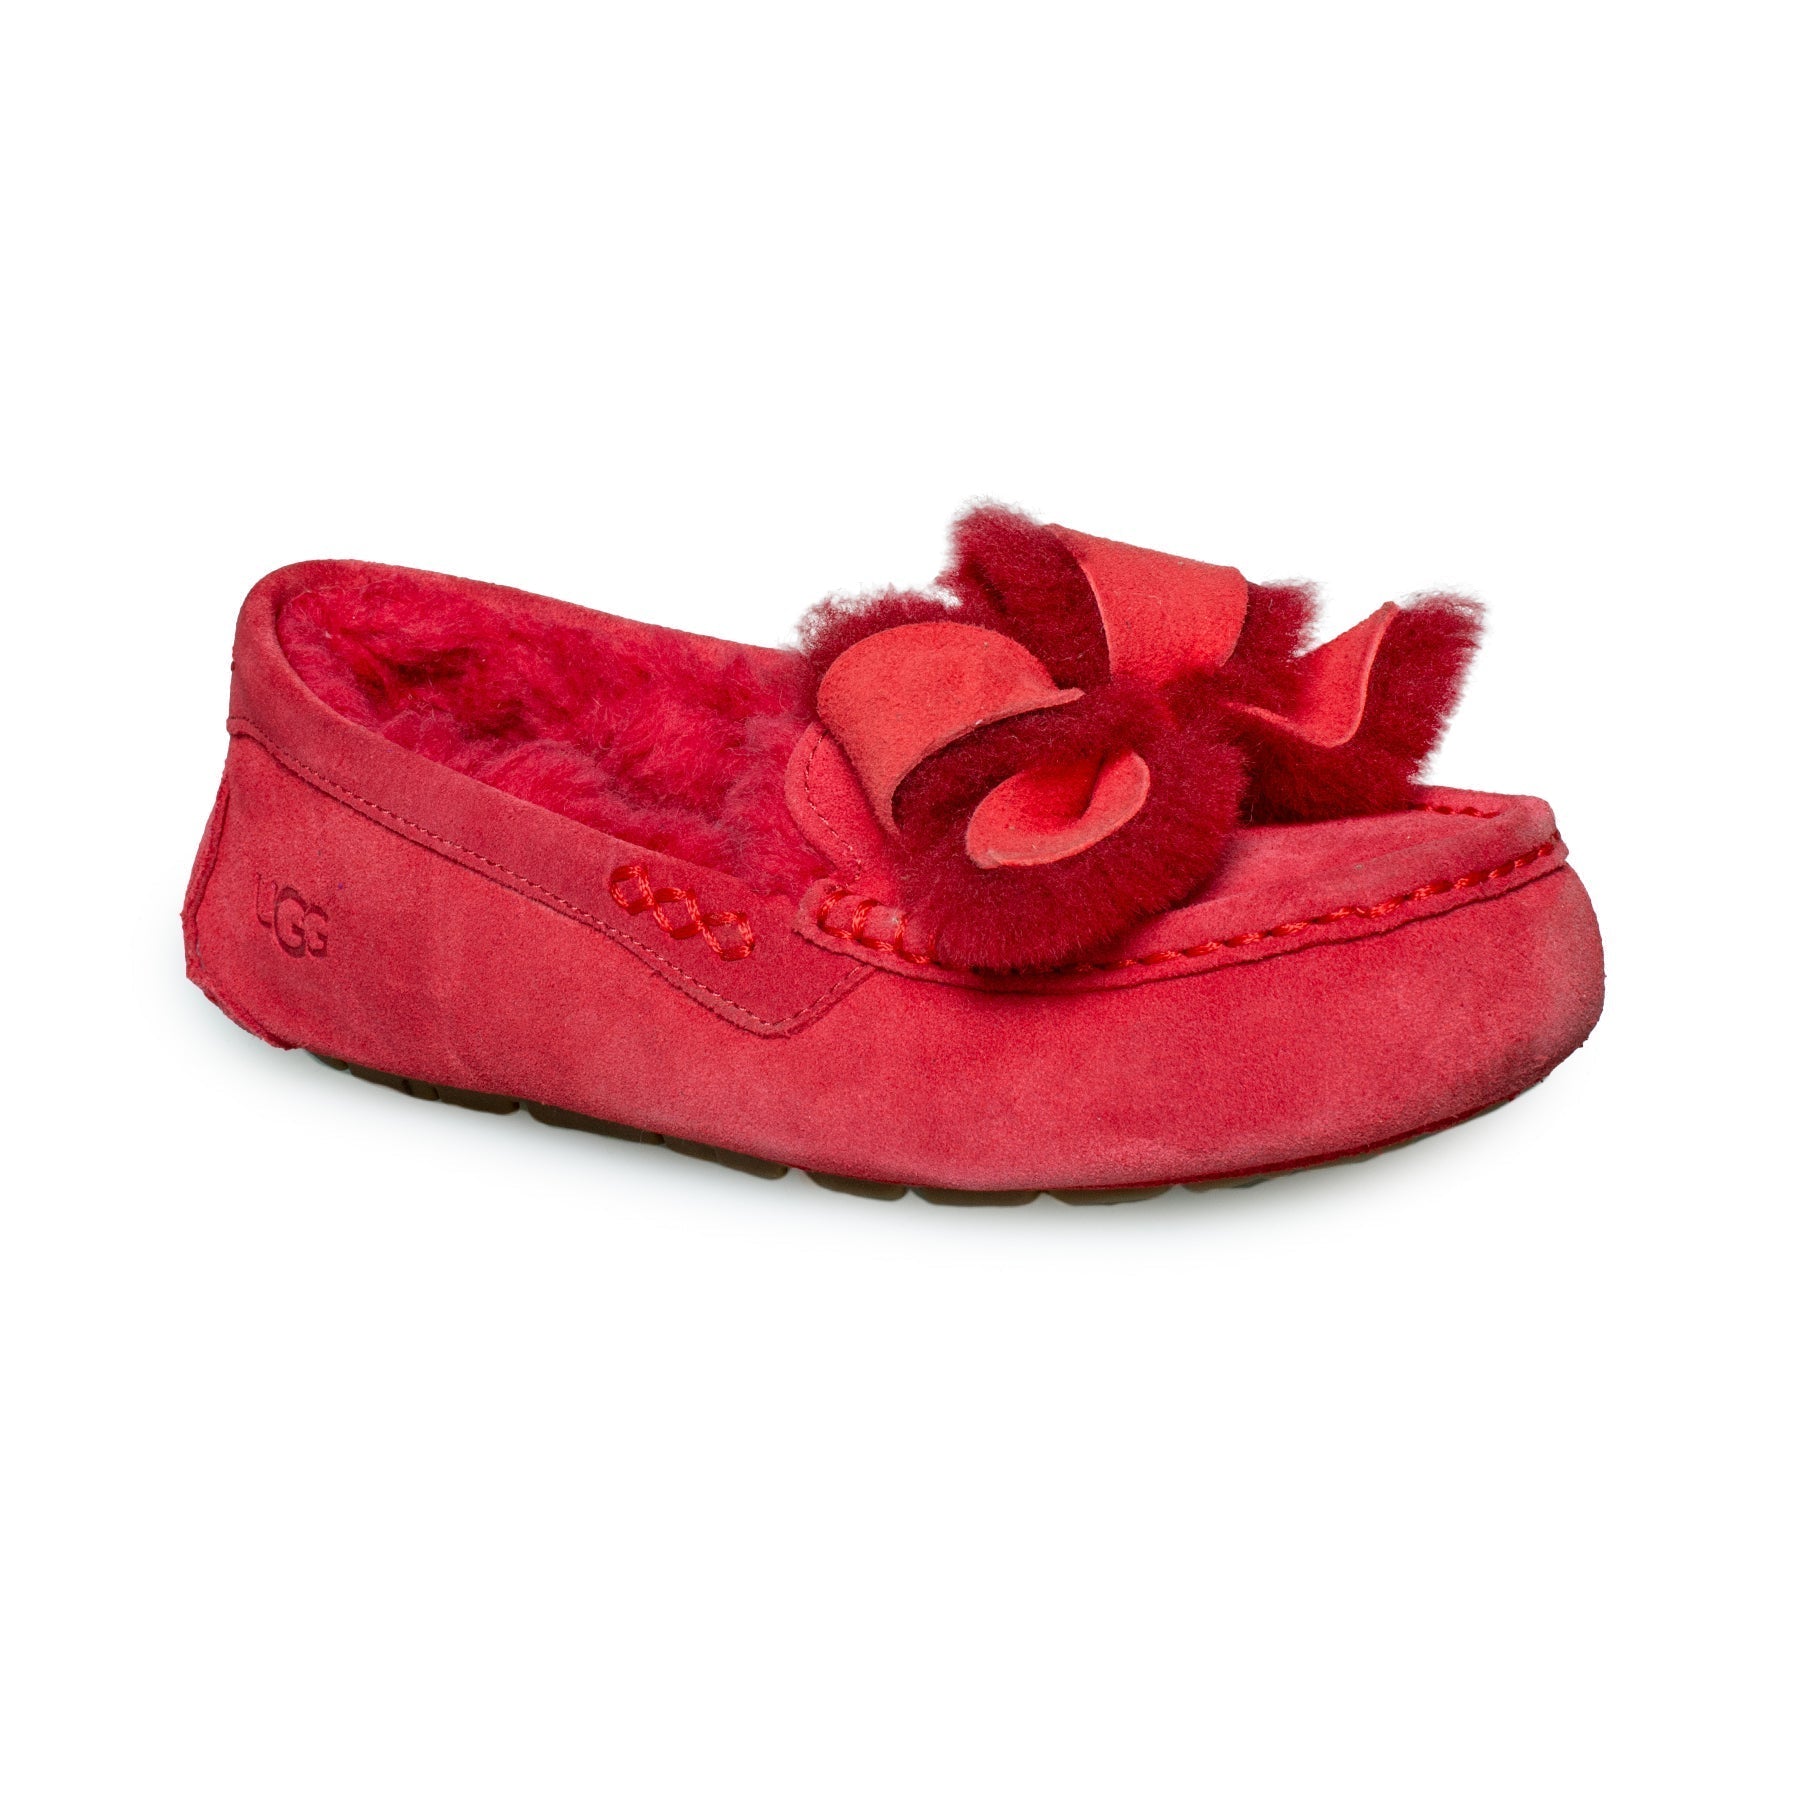 UGG Ansley Heritage Bow Ribbon Red Slippers - Women's